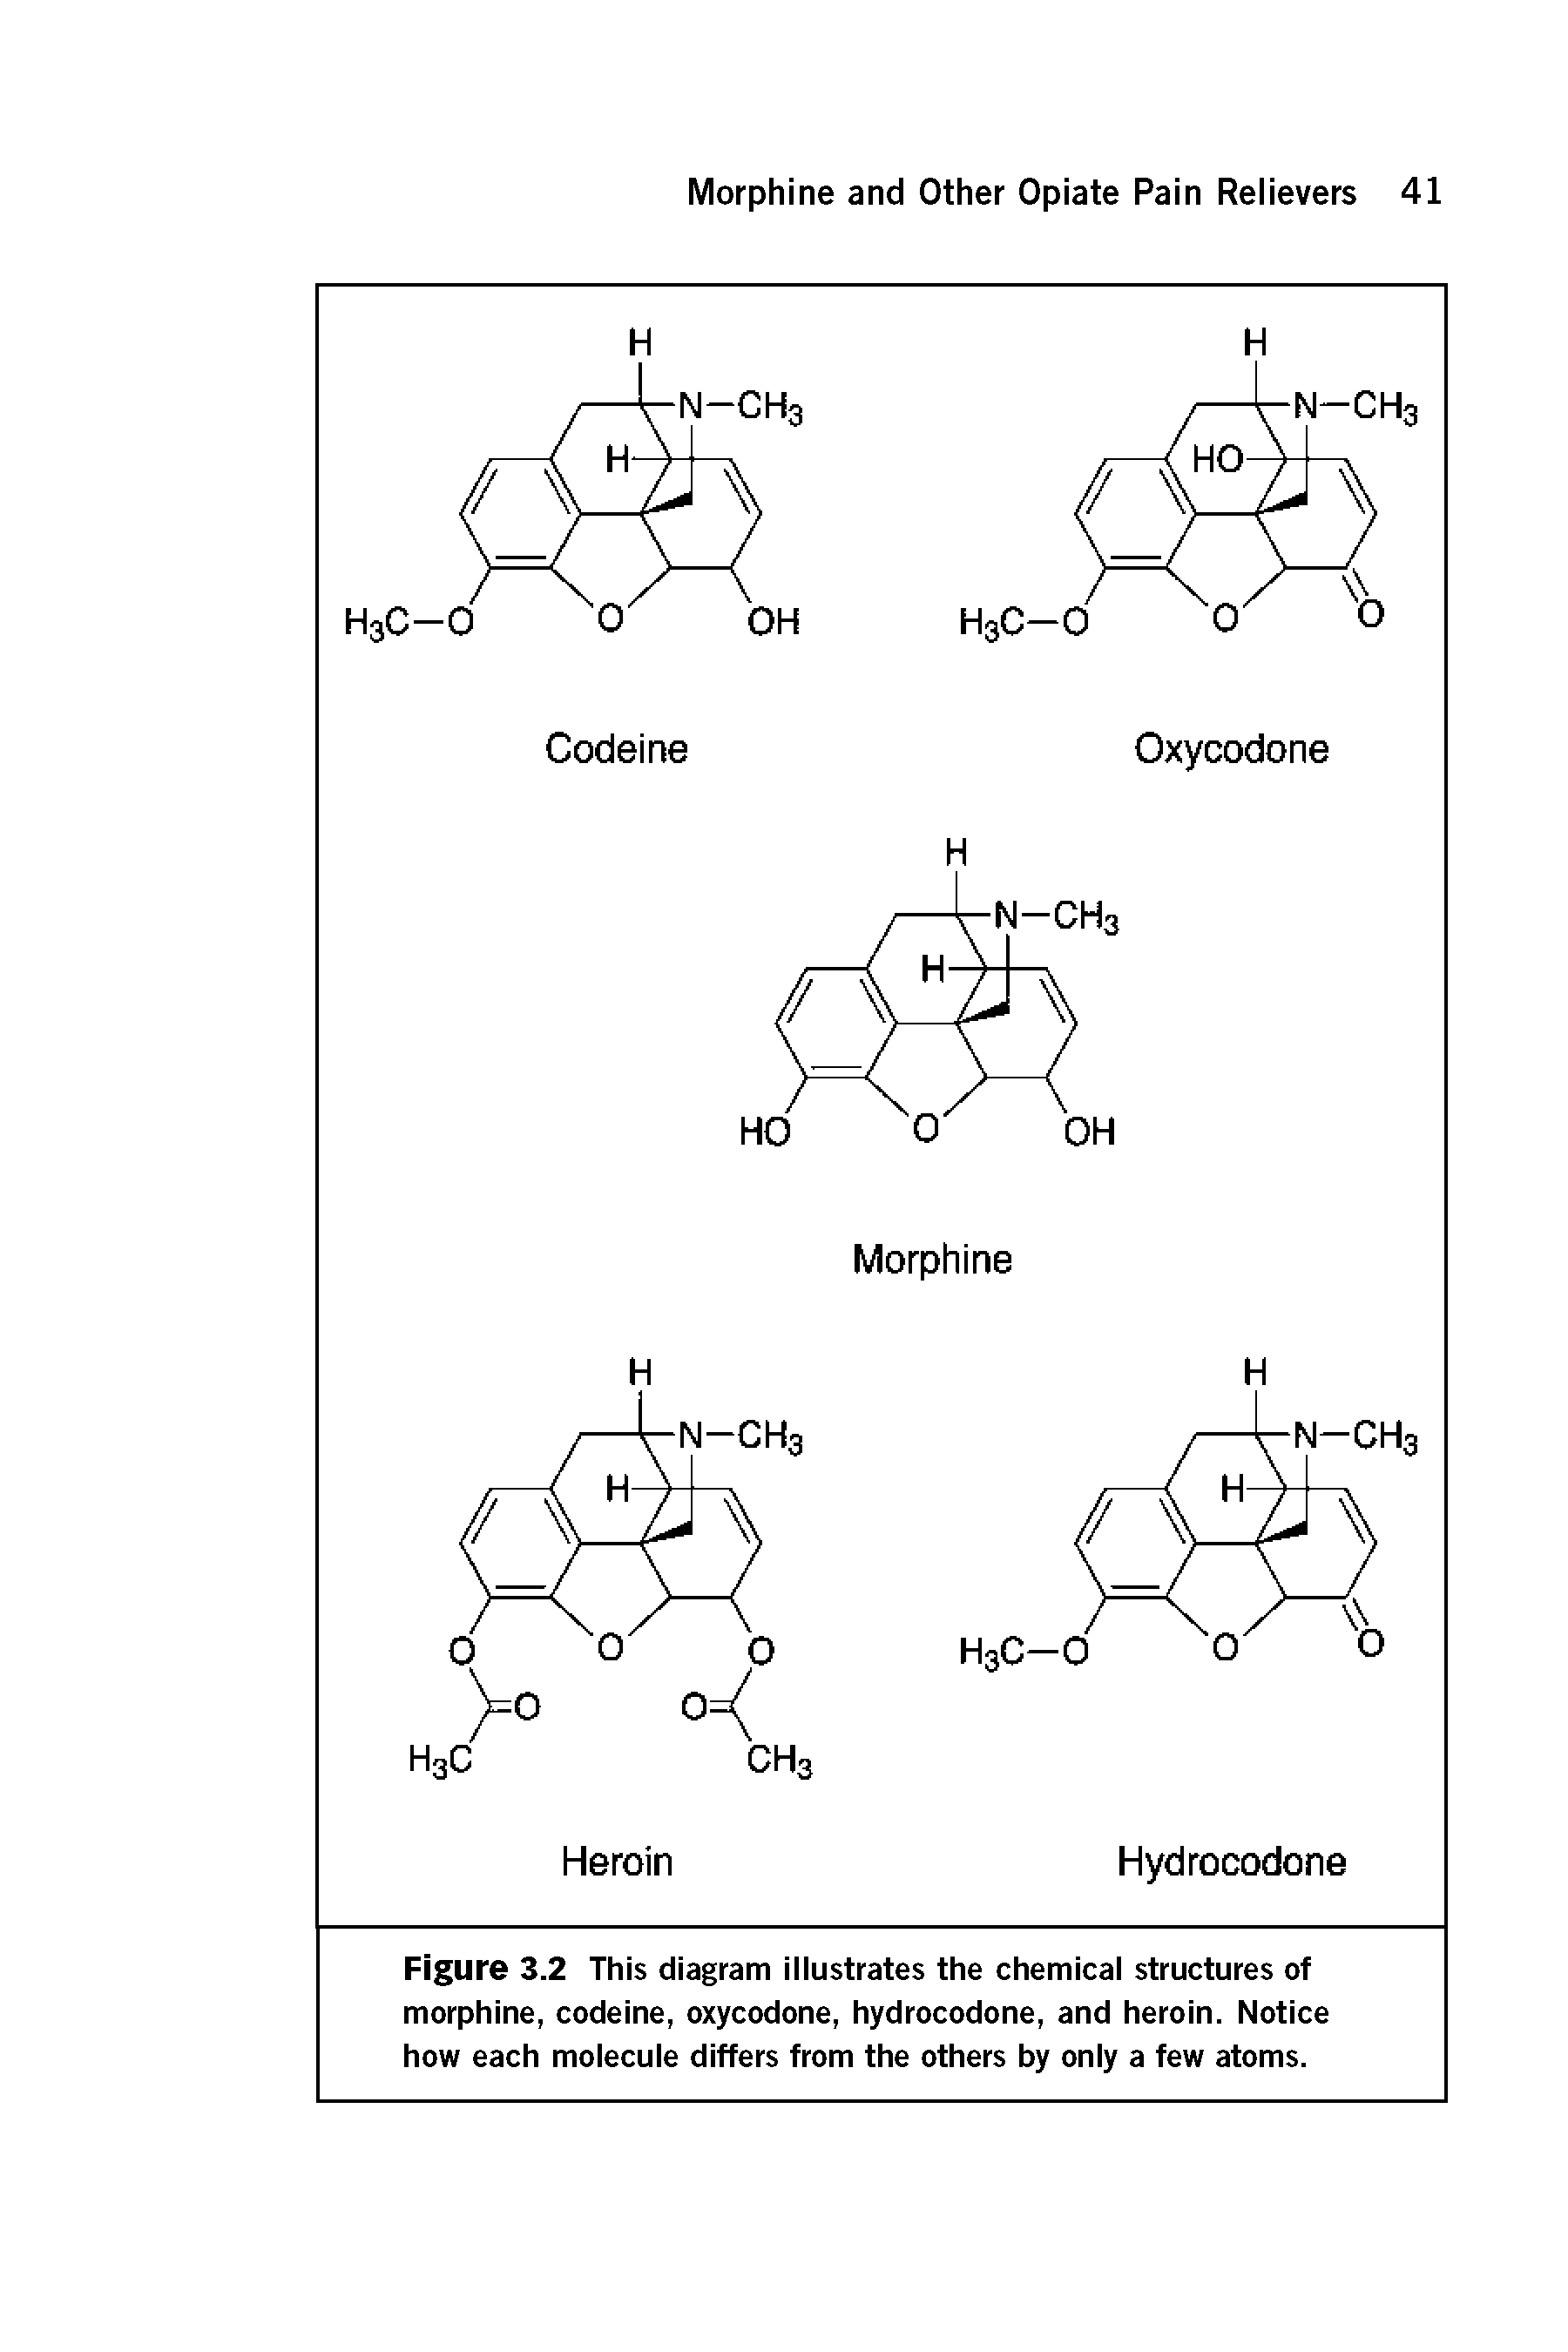 Figure 3.2 This diagram illustrates the chemical structures of morphine, codeine, oxycodone, hydrocodone, and heroin. Notice how each molecule differs from the others by only a few atoms.